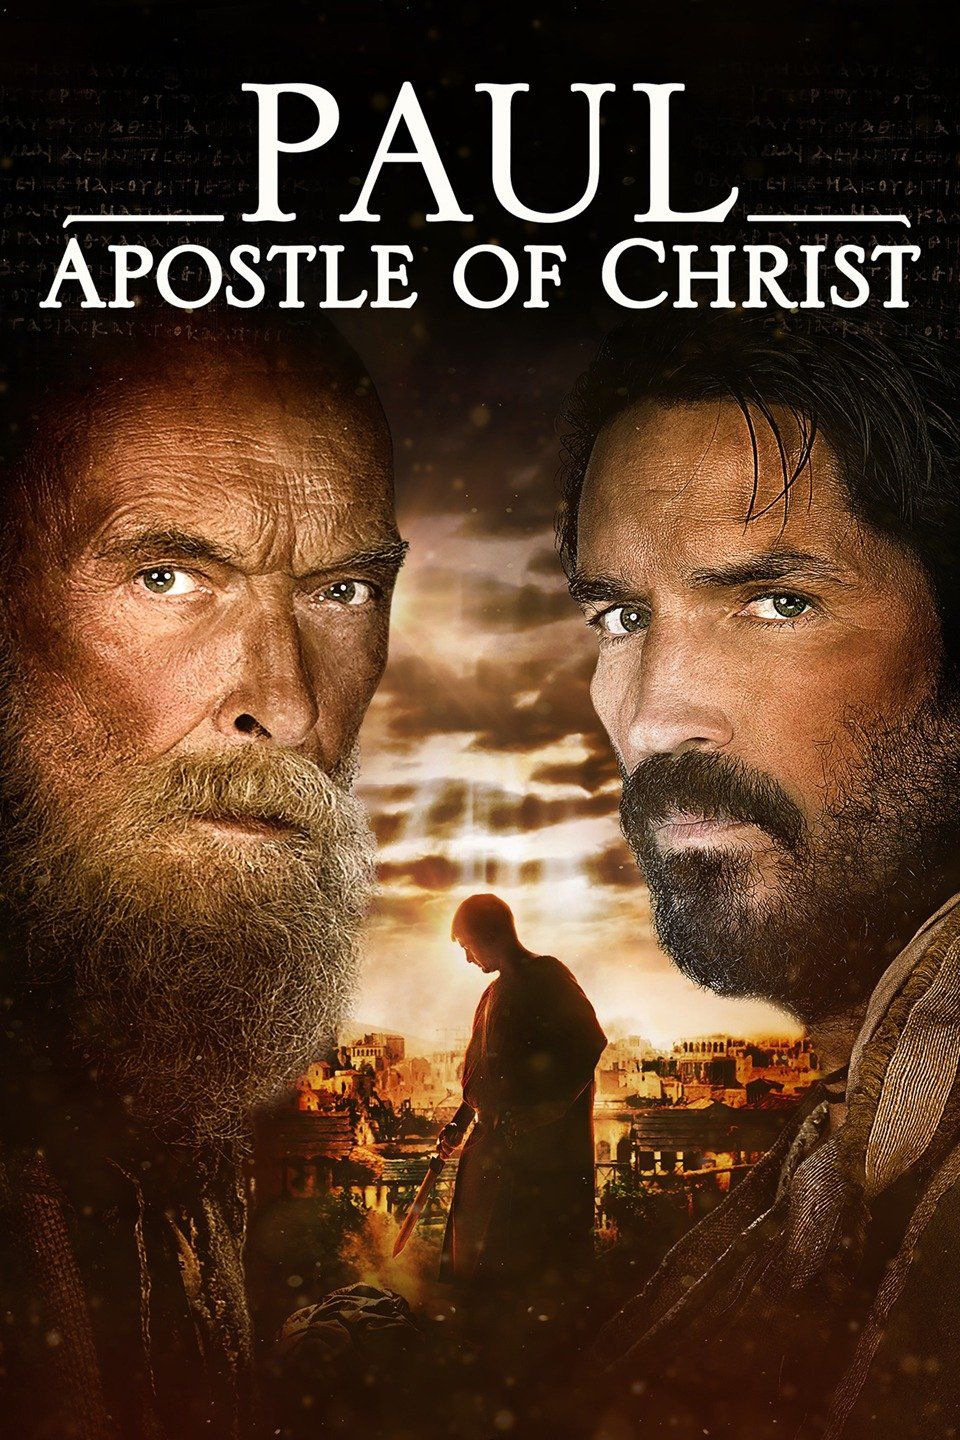 15 Best Bible Movies - Top Biblical Story Films for the Family